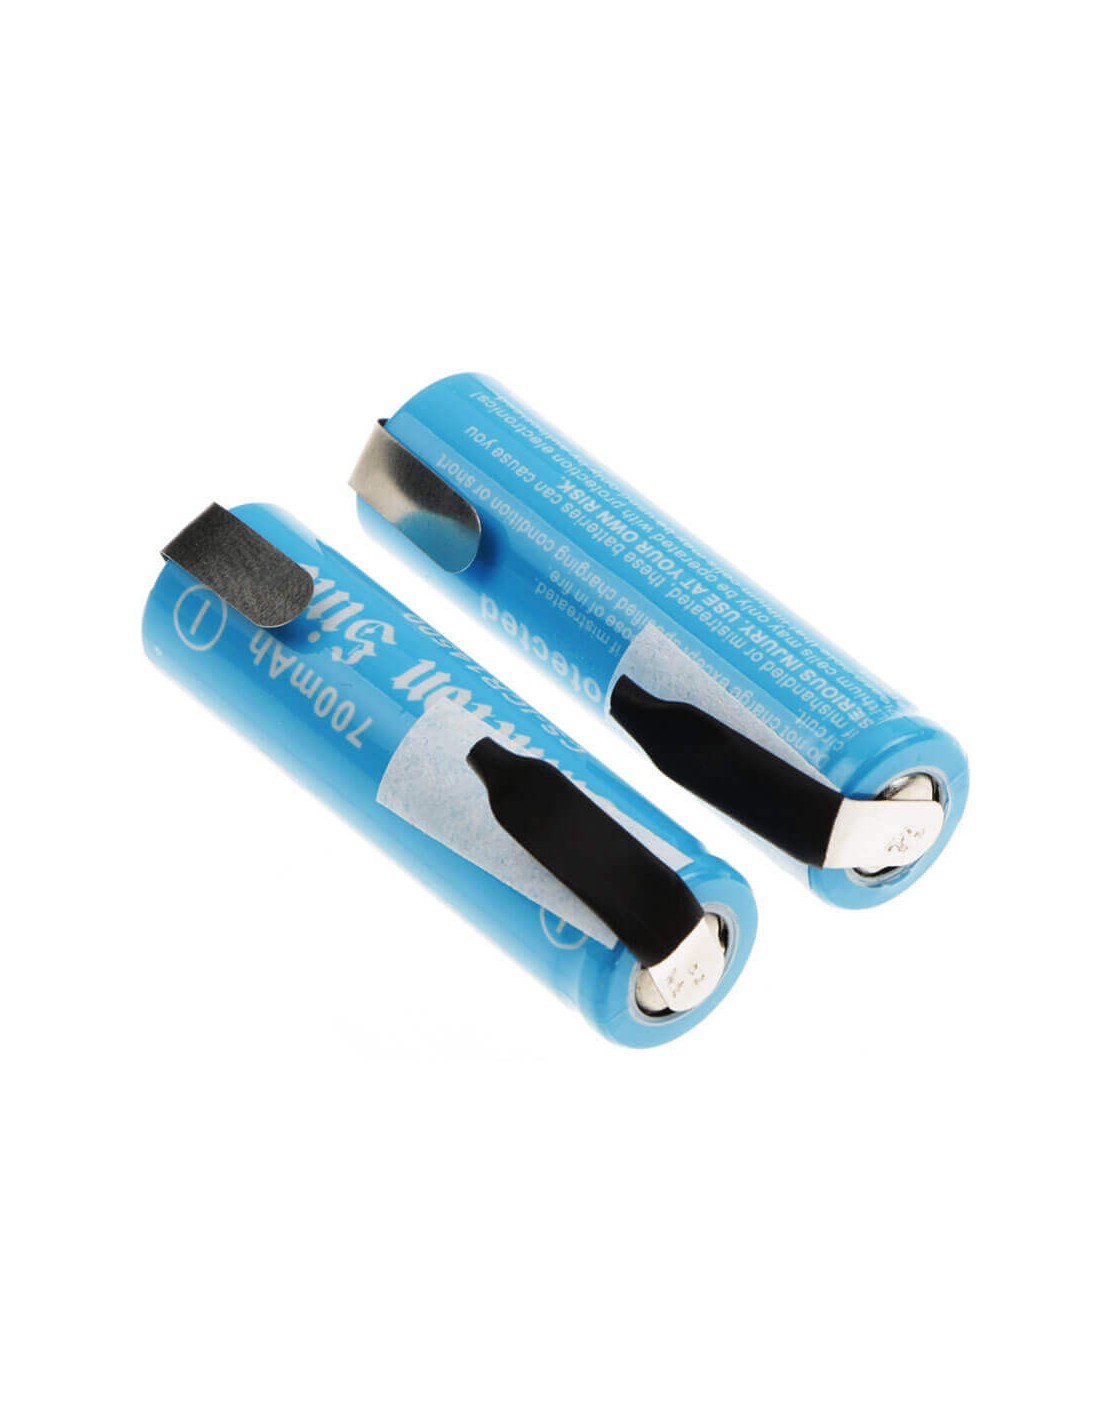 Battery for Lithium Ion, 2pcs Pack With Solder Tabs 3.7V, 700mAh - 2.59Wh